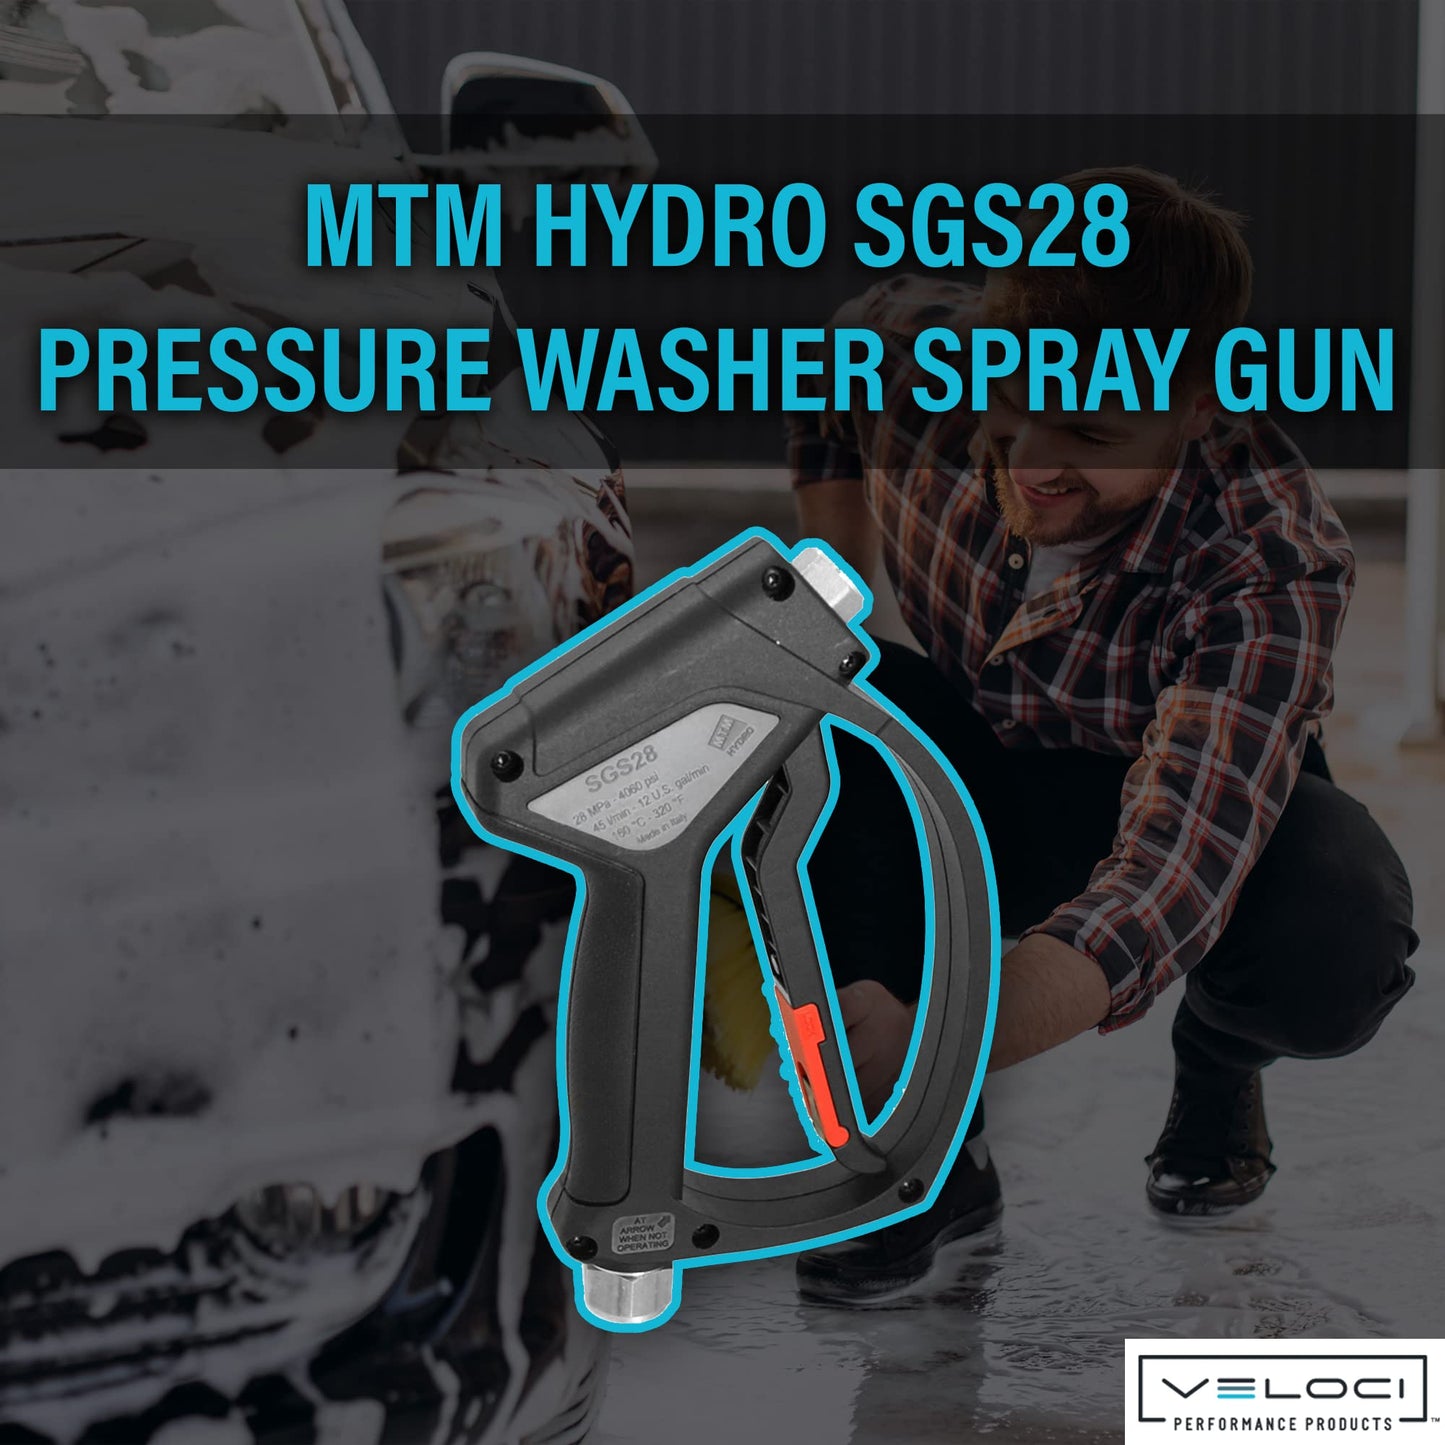 MTM Hydro SGS28 Pressure Washer Car Wash Sprayer Gun with Swivel Nickel-Plated Brass Connections, High Pressure 4000 PSI Power Washer Attachment for Boat, Roof, Car Washing